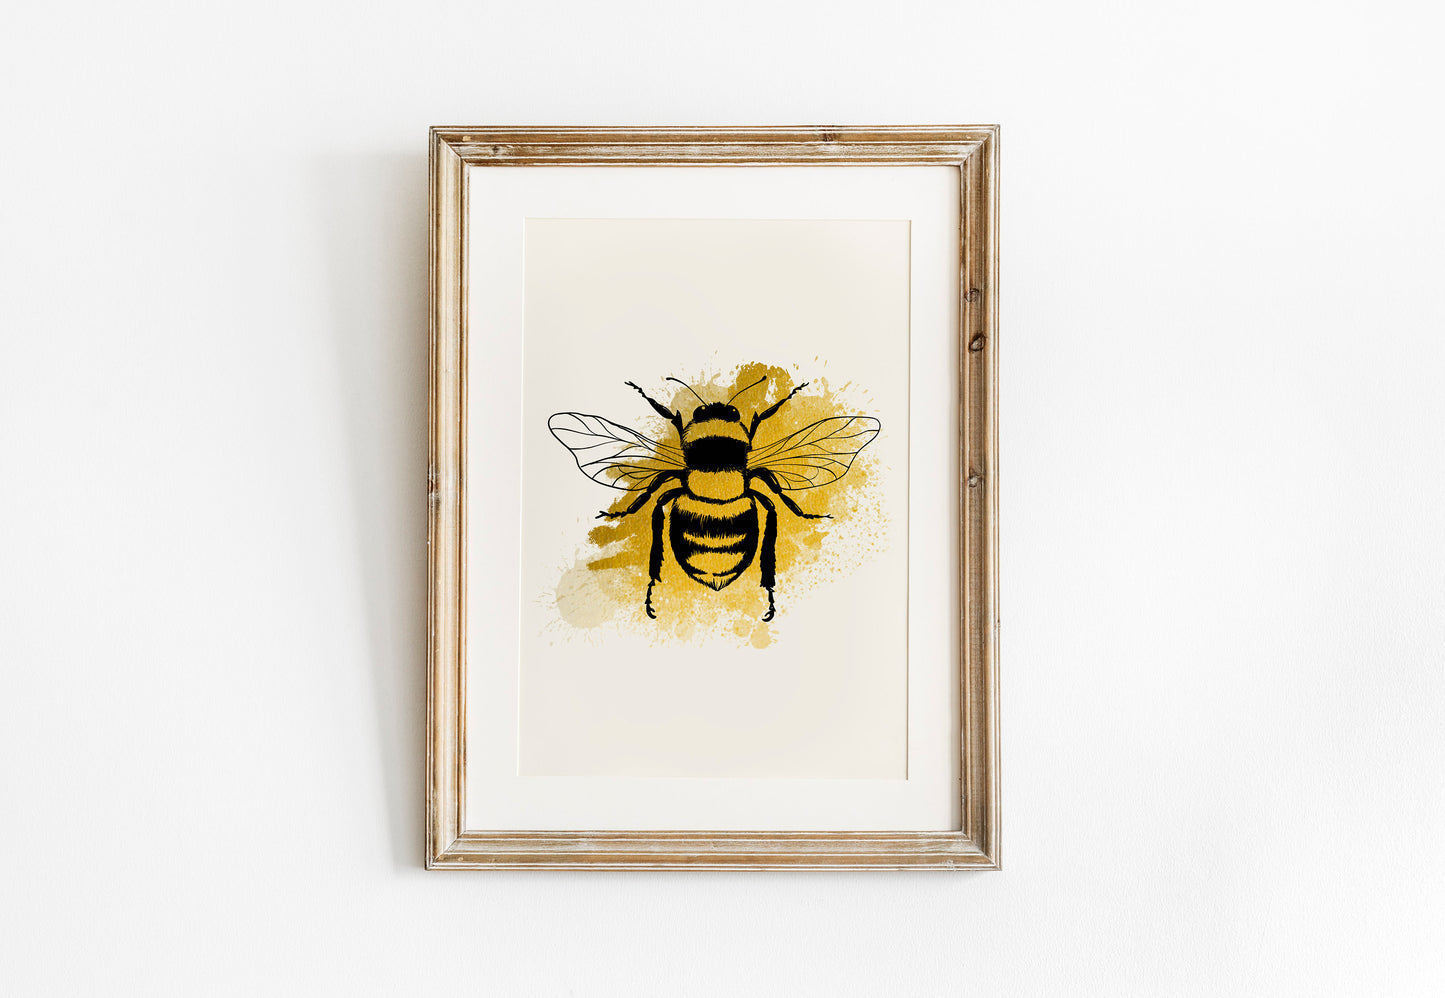 Bee Art Print, Manchester Art Print, Manchester Bee, Manchester Print Unframed, A5/A4/A3/A2, Manchester Bee, Bee Art, Gold Colouring,